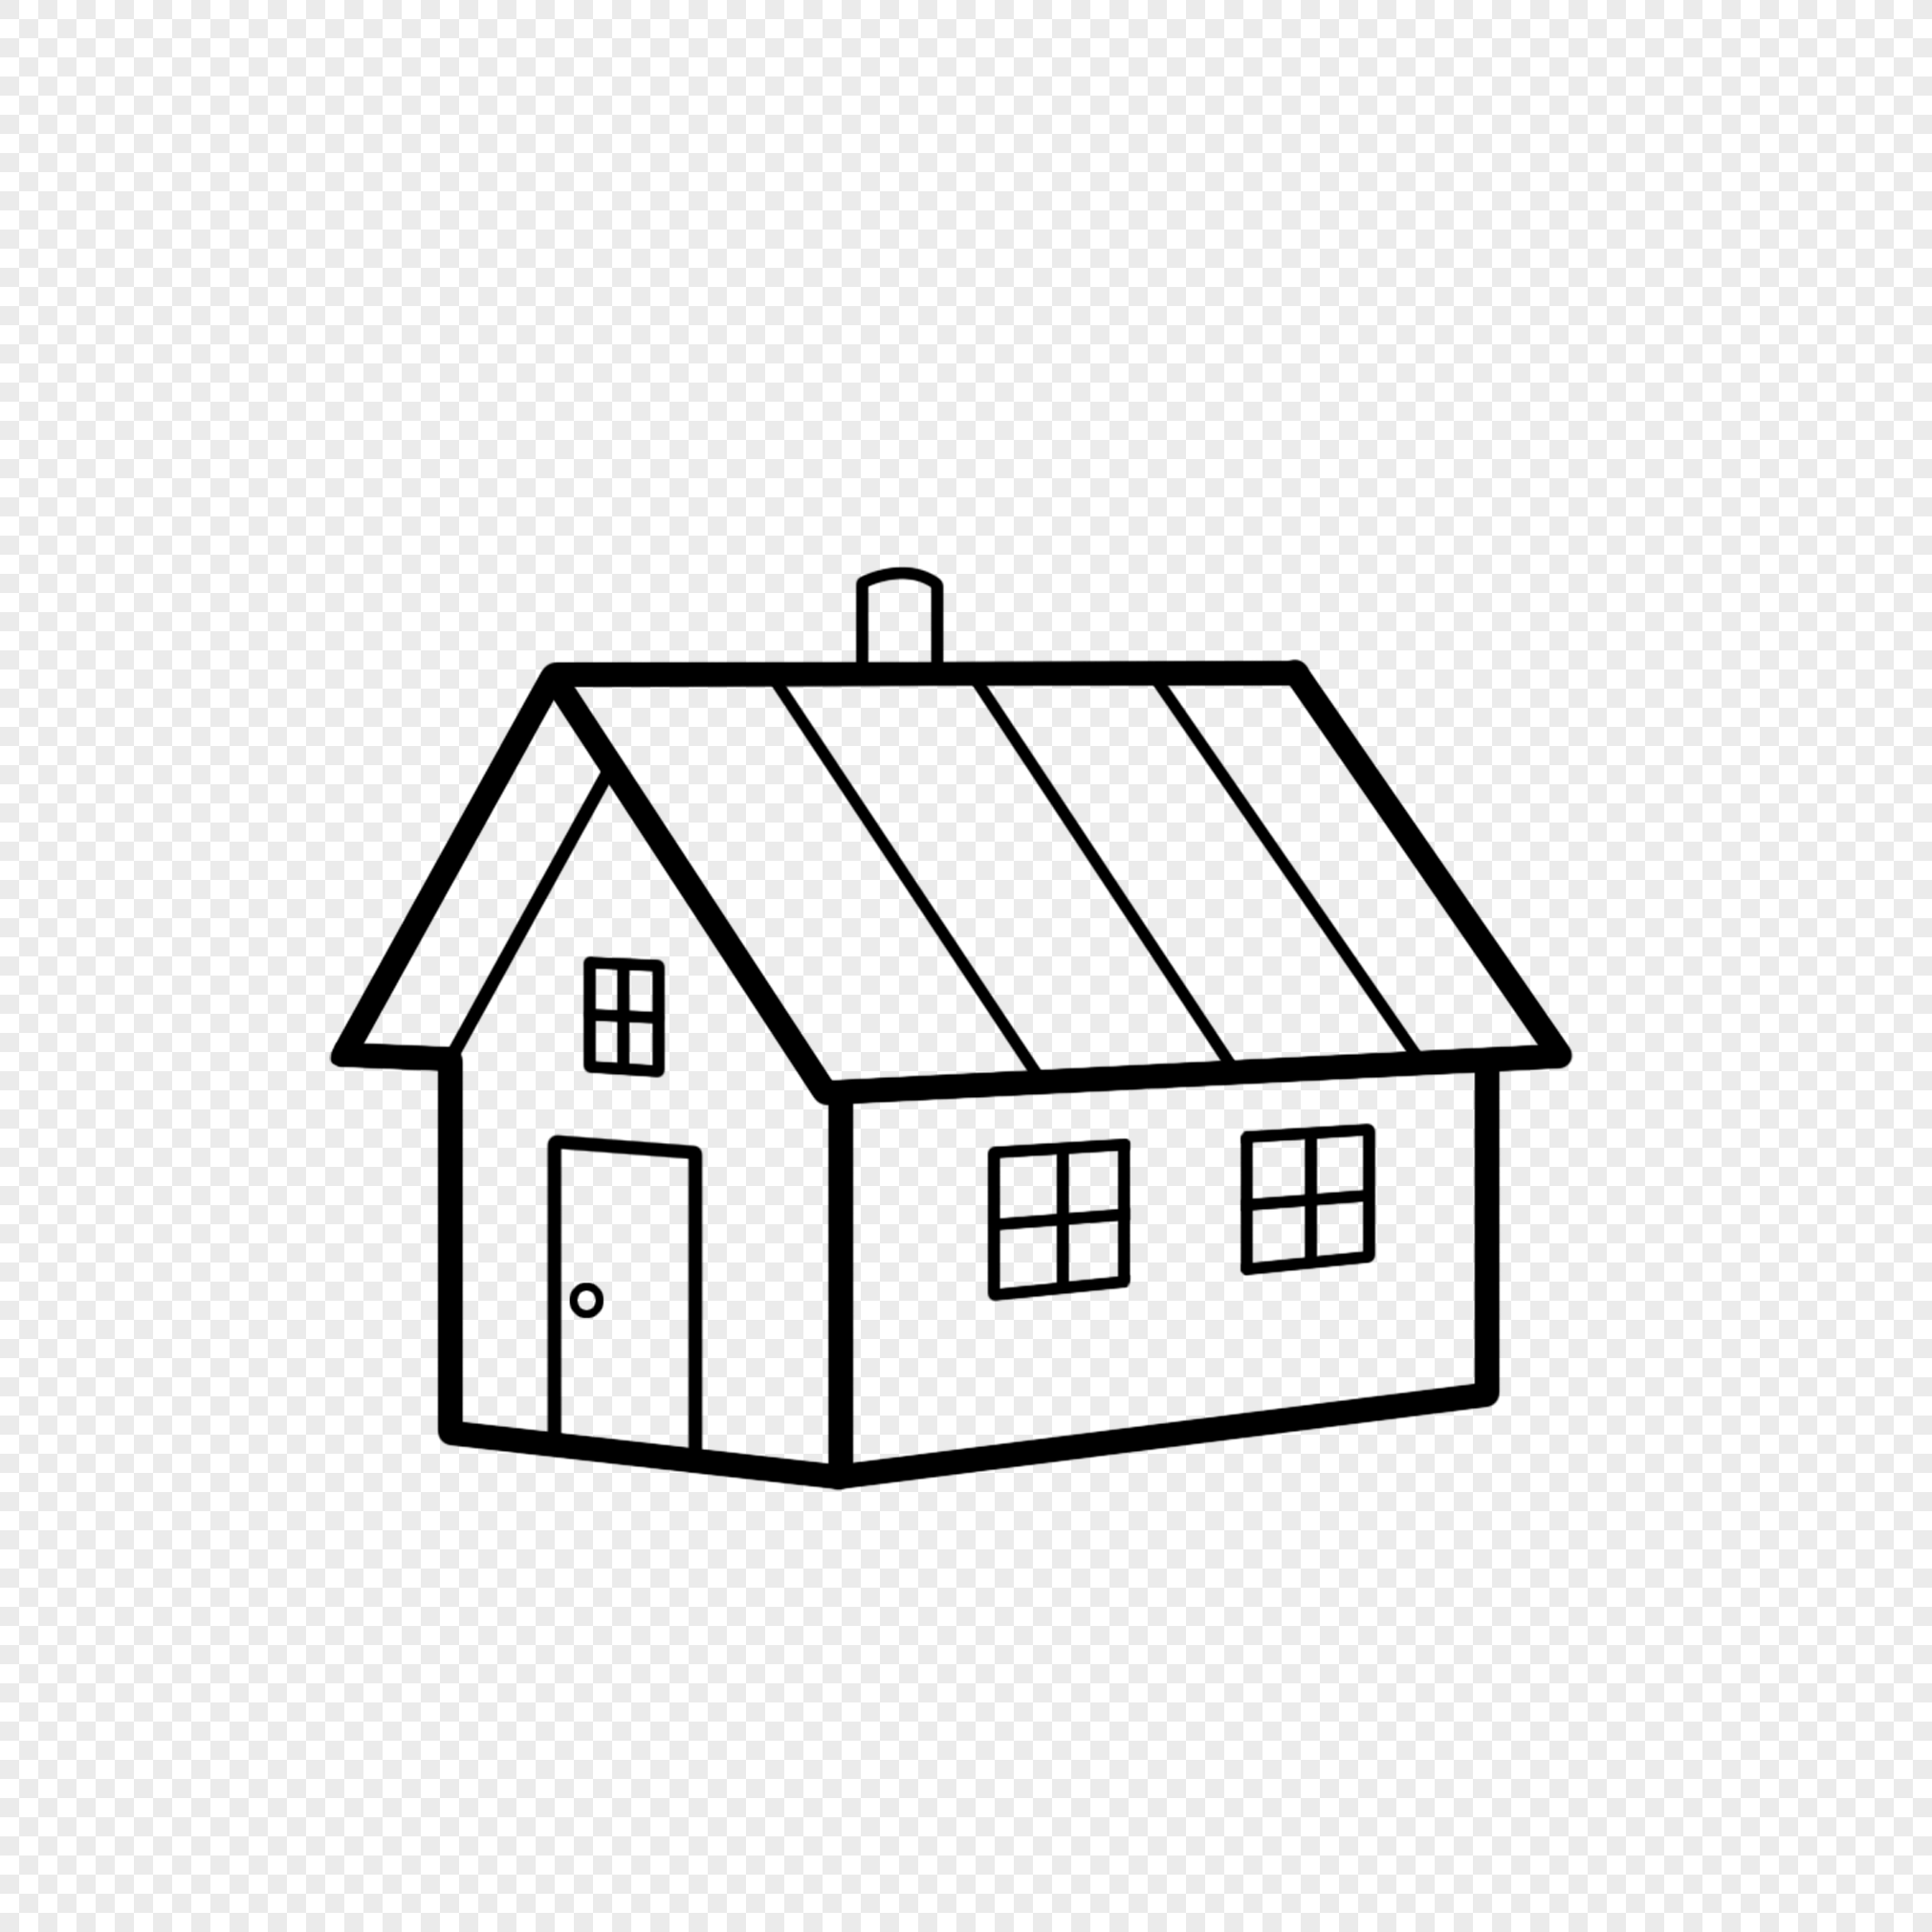 Stick Figure House PNG Images With Transparent Background Free